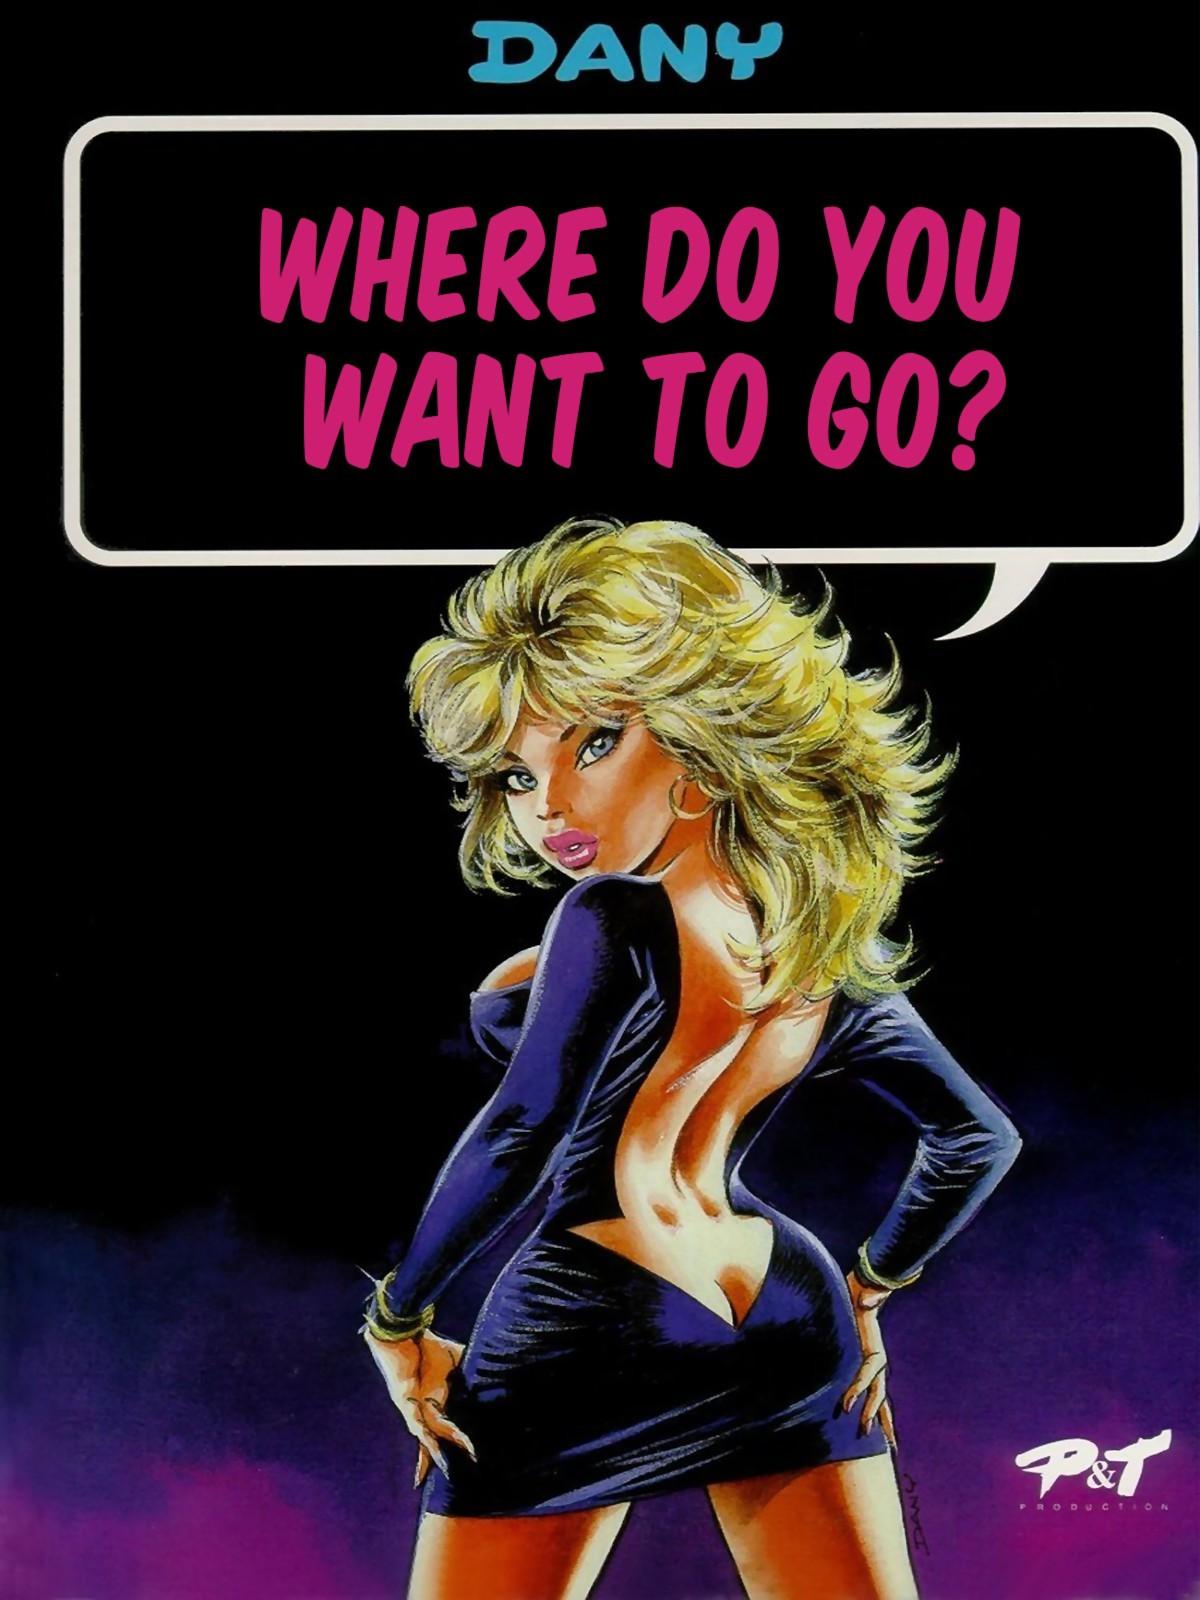 DANY – WHERE DO YOU WANT TO GO